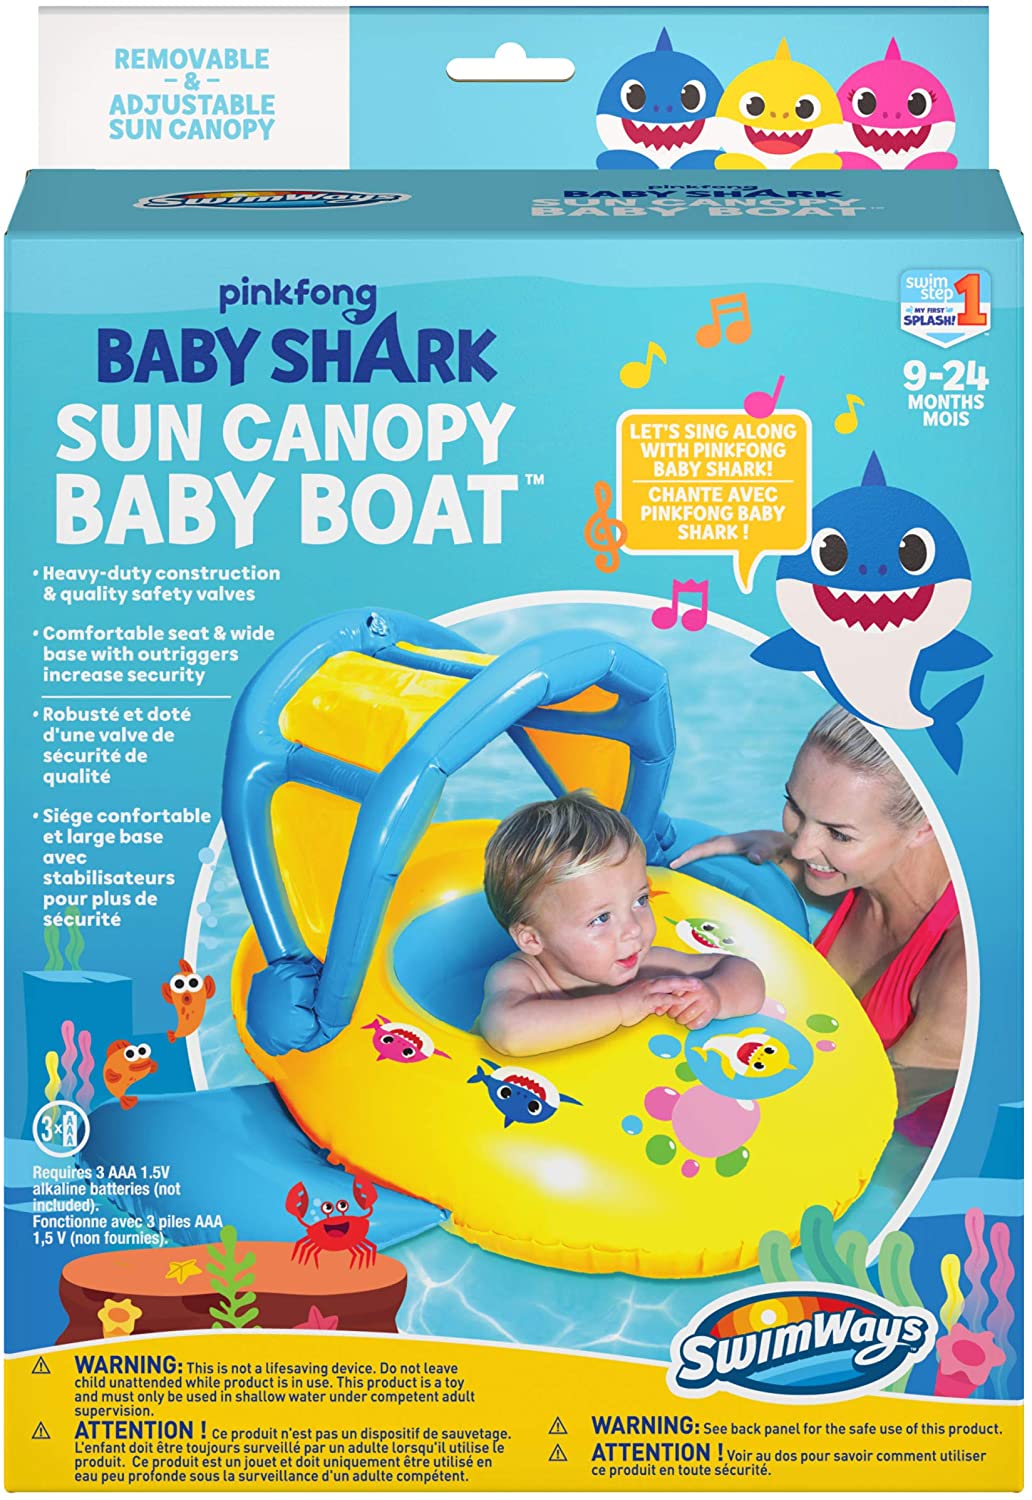 SwimWays Pinkfong Baby Shark Sun Canopy Baby Boat w/ Music $11.93 + 6% SD Cashback + Free Store Pickup at Macy's or FS on $25+